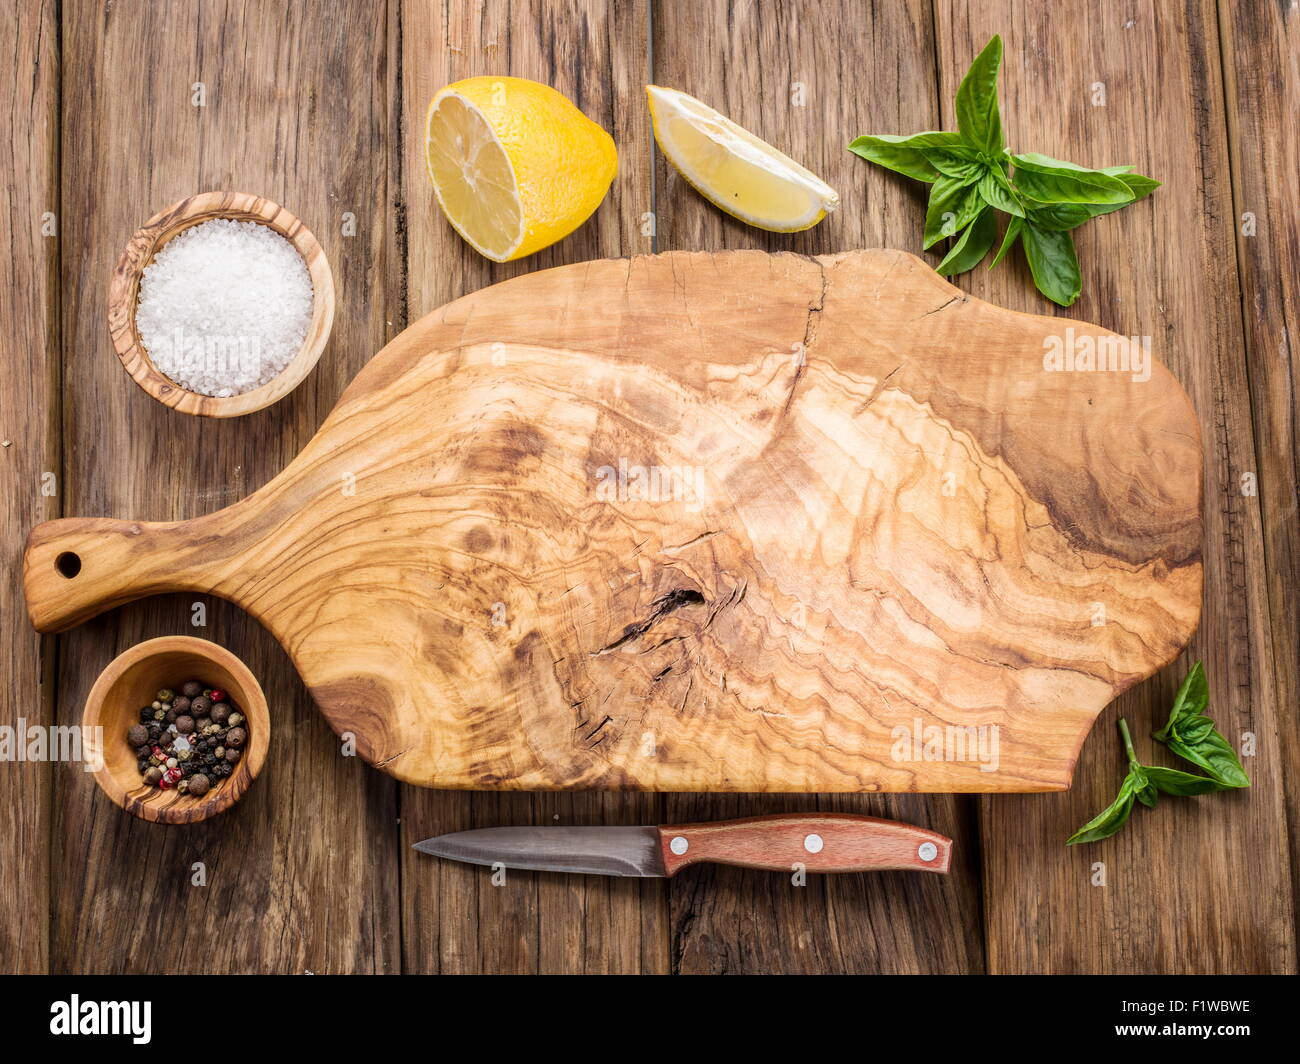 Olive cutting board and spices on a wooden table. Stock Photo